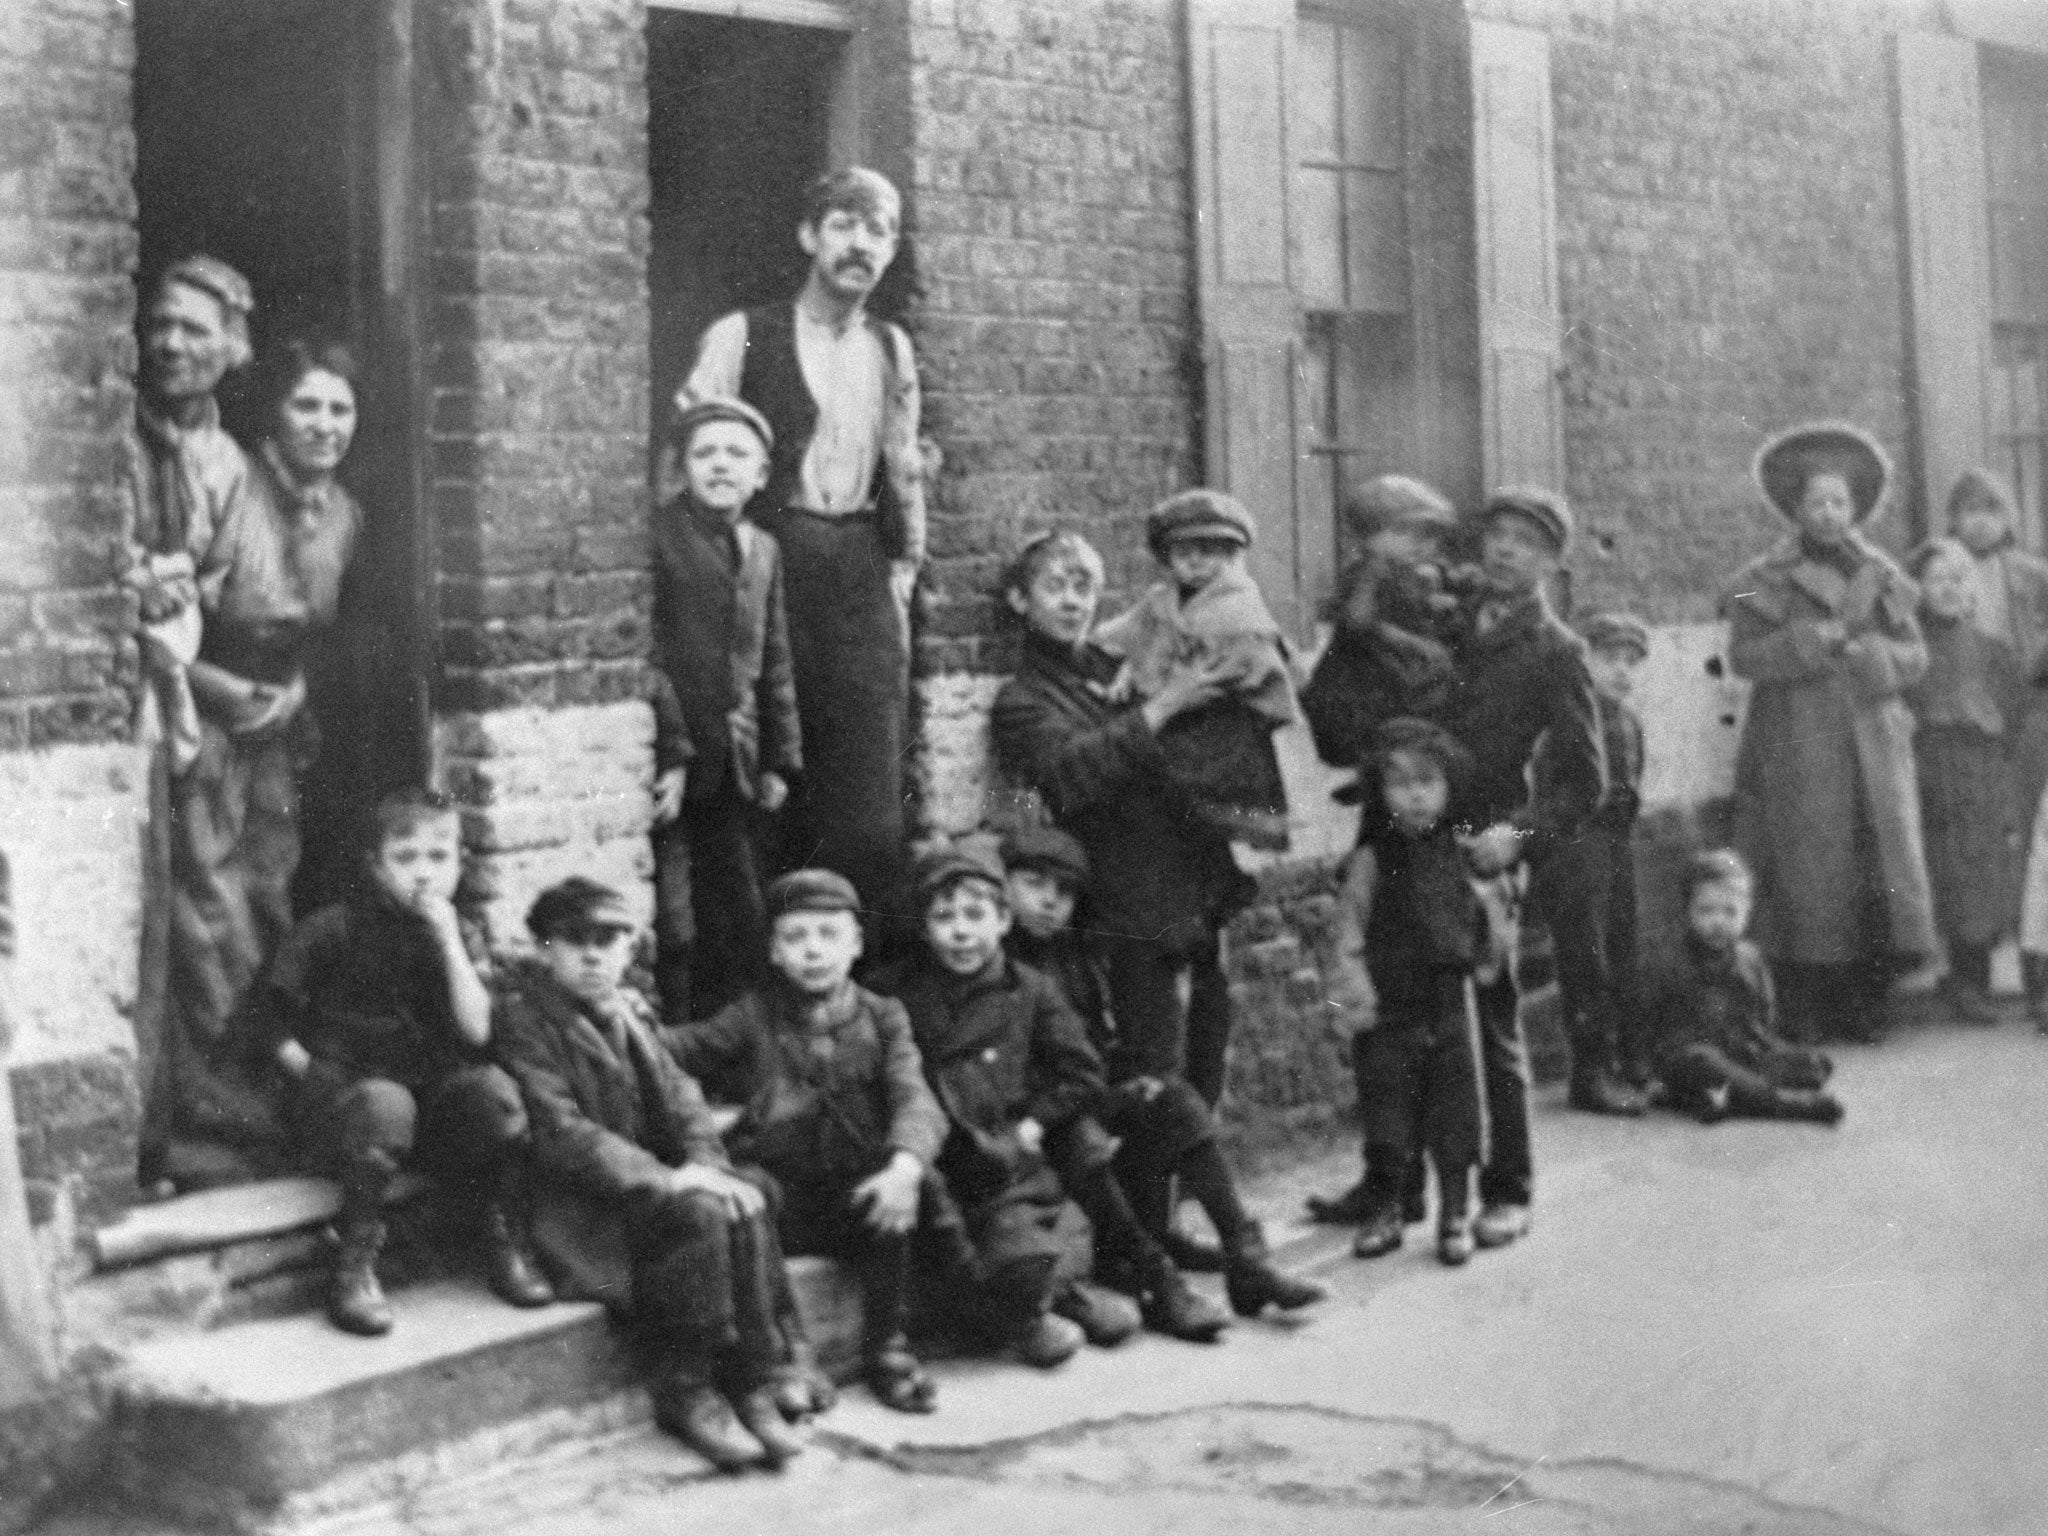 circa 1900: A group of boys and their families living in the East End of London.